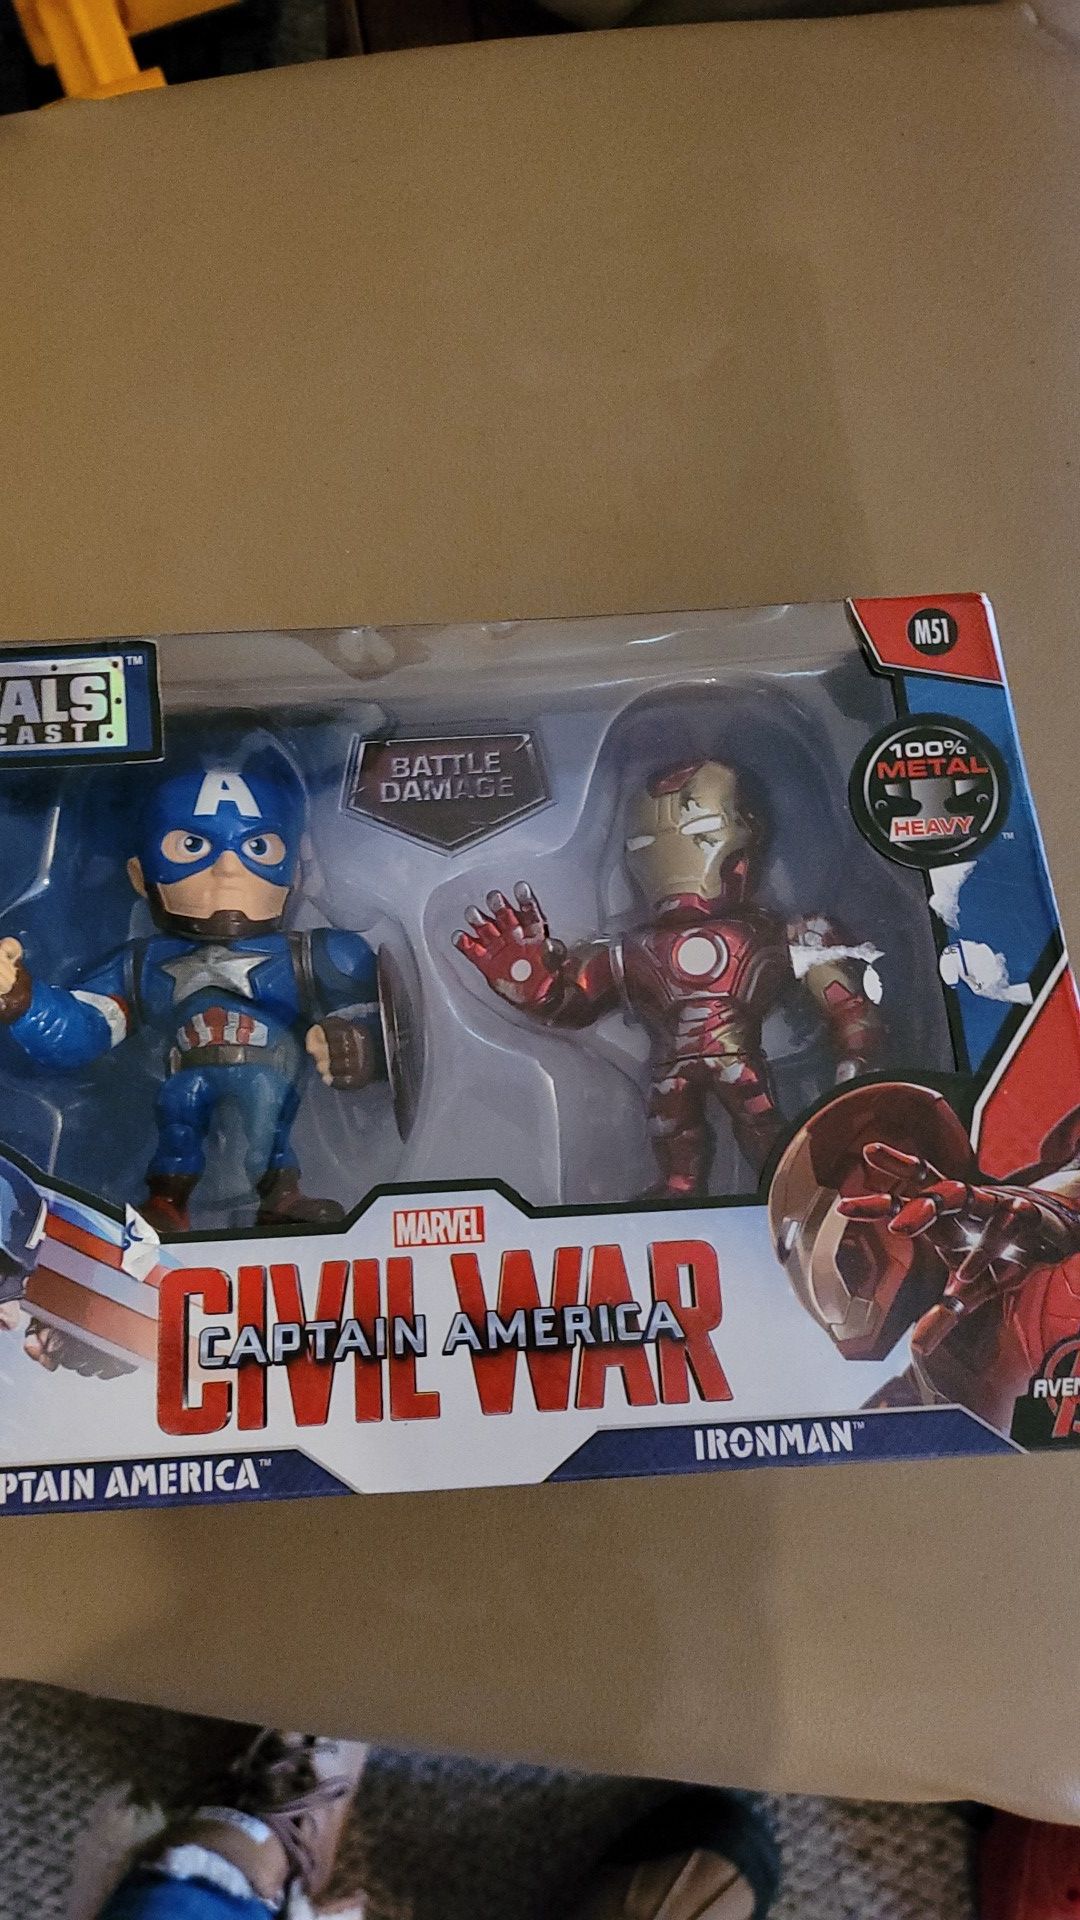 Metal captain America and Ironman toys